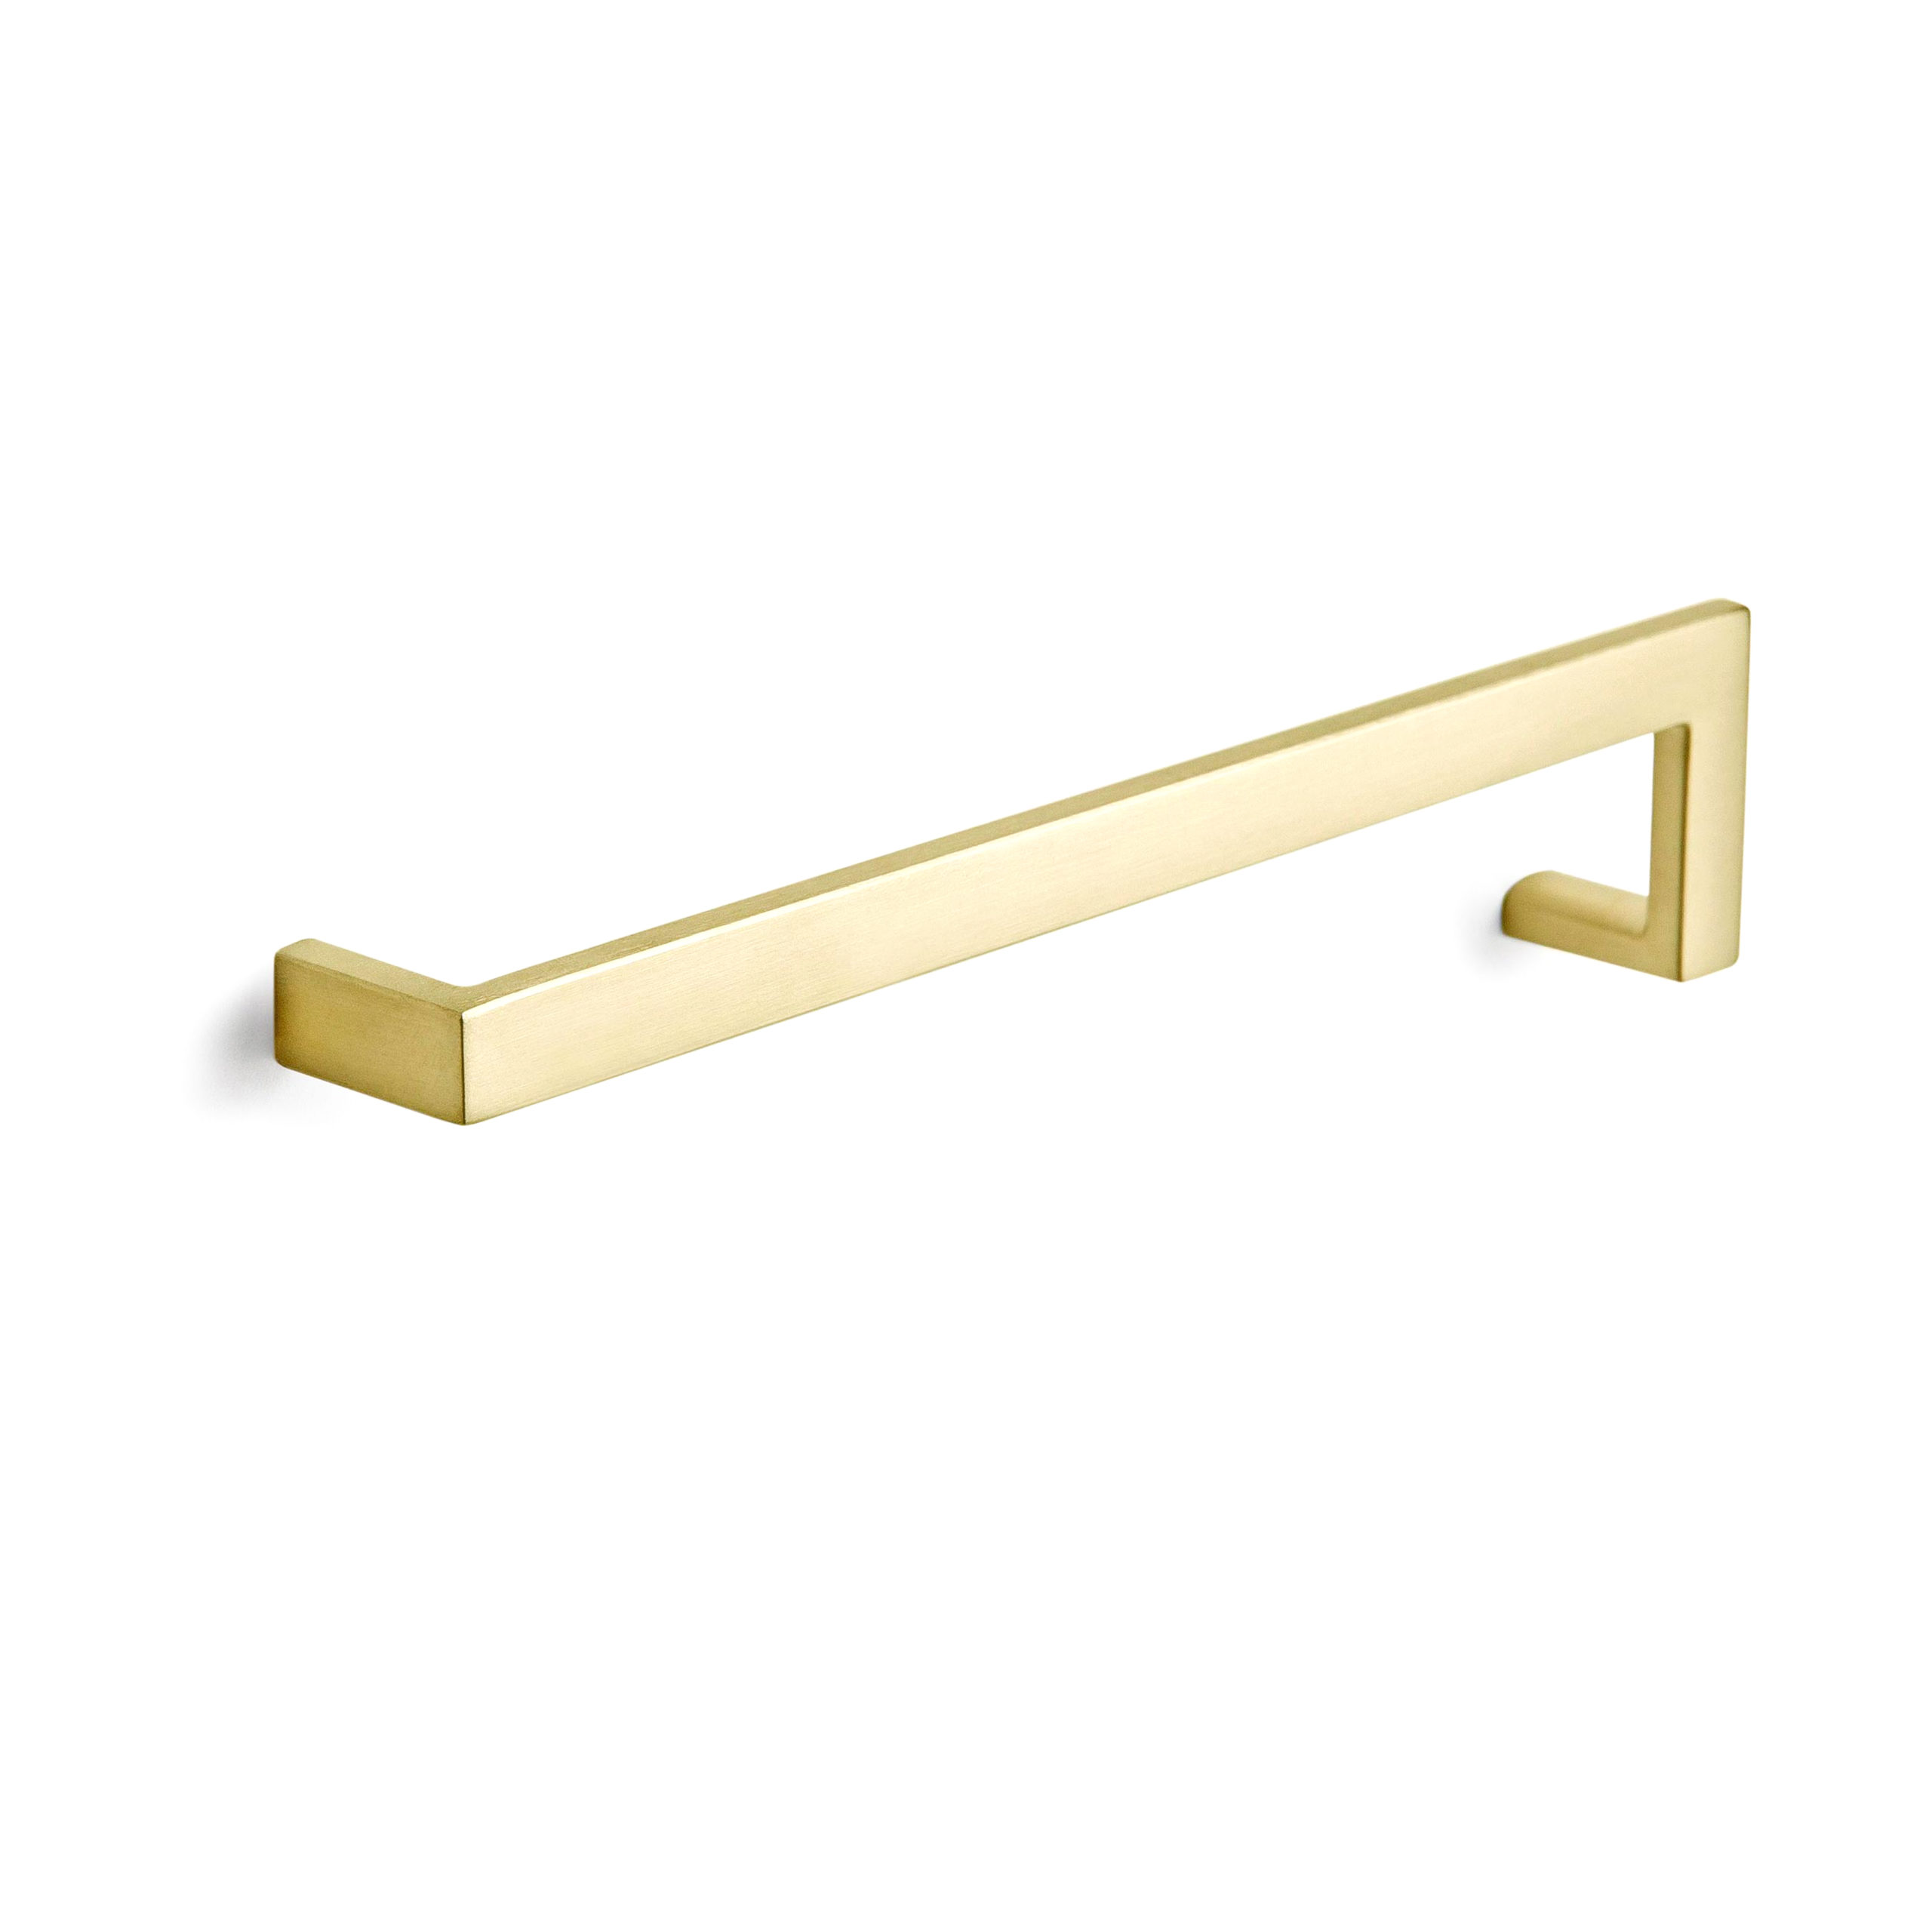 Satin brass modern cabinet door pull - product featured image - 7.5 inch 192 mm length - product SKU J 102 SBZ